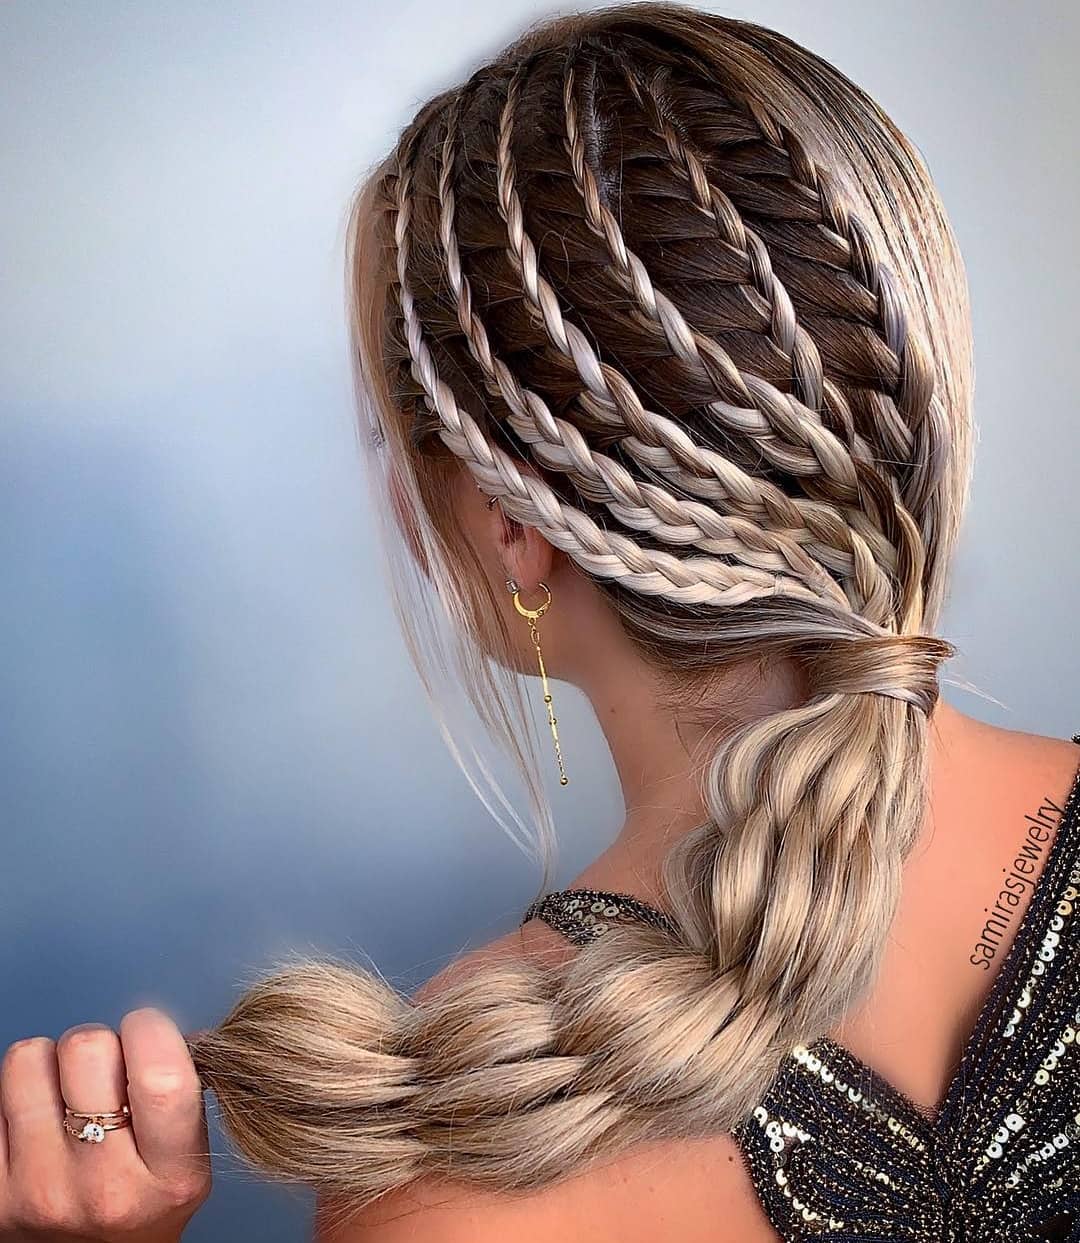 10 Amazing Braided Hairstyles for Long Hair - 2020 Women ...